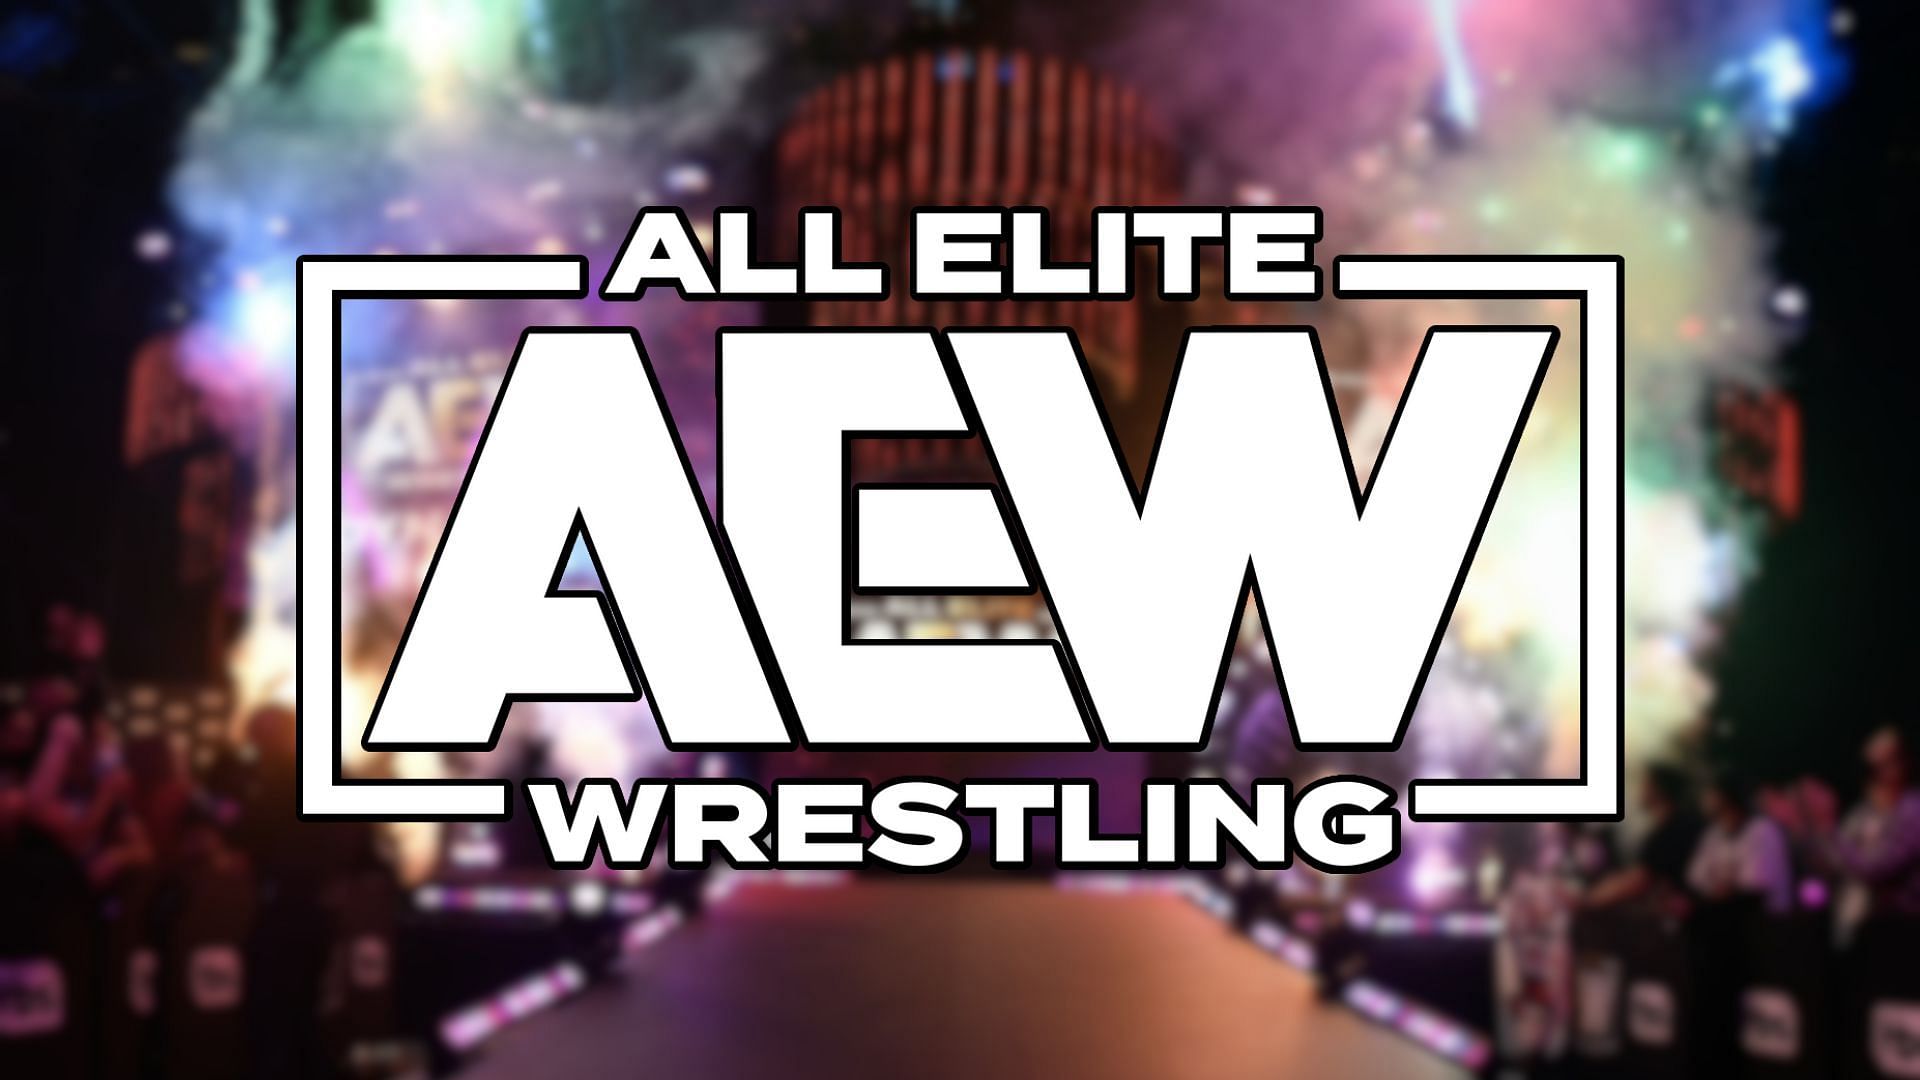 Will AEW begin to book this star more prominently?